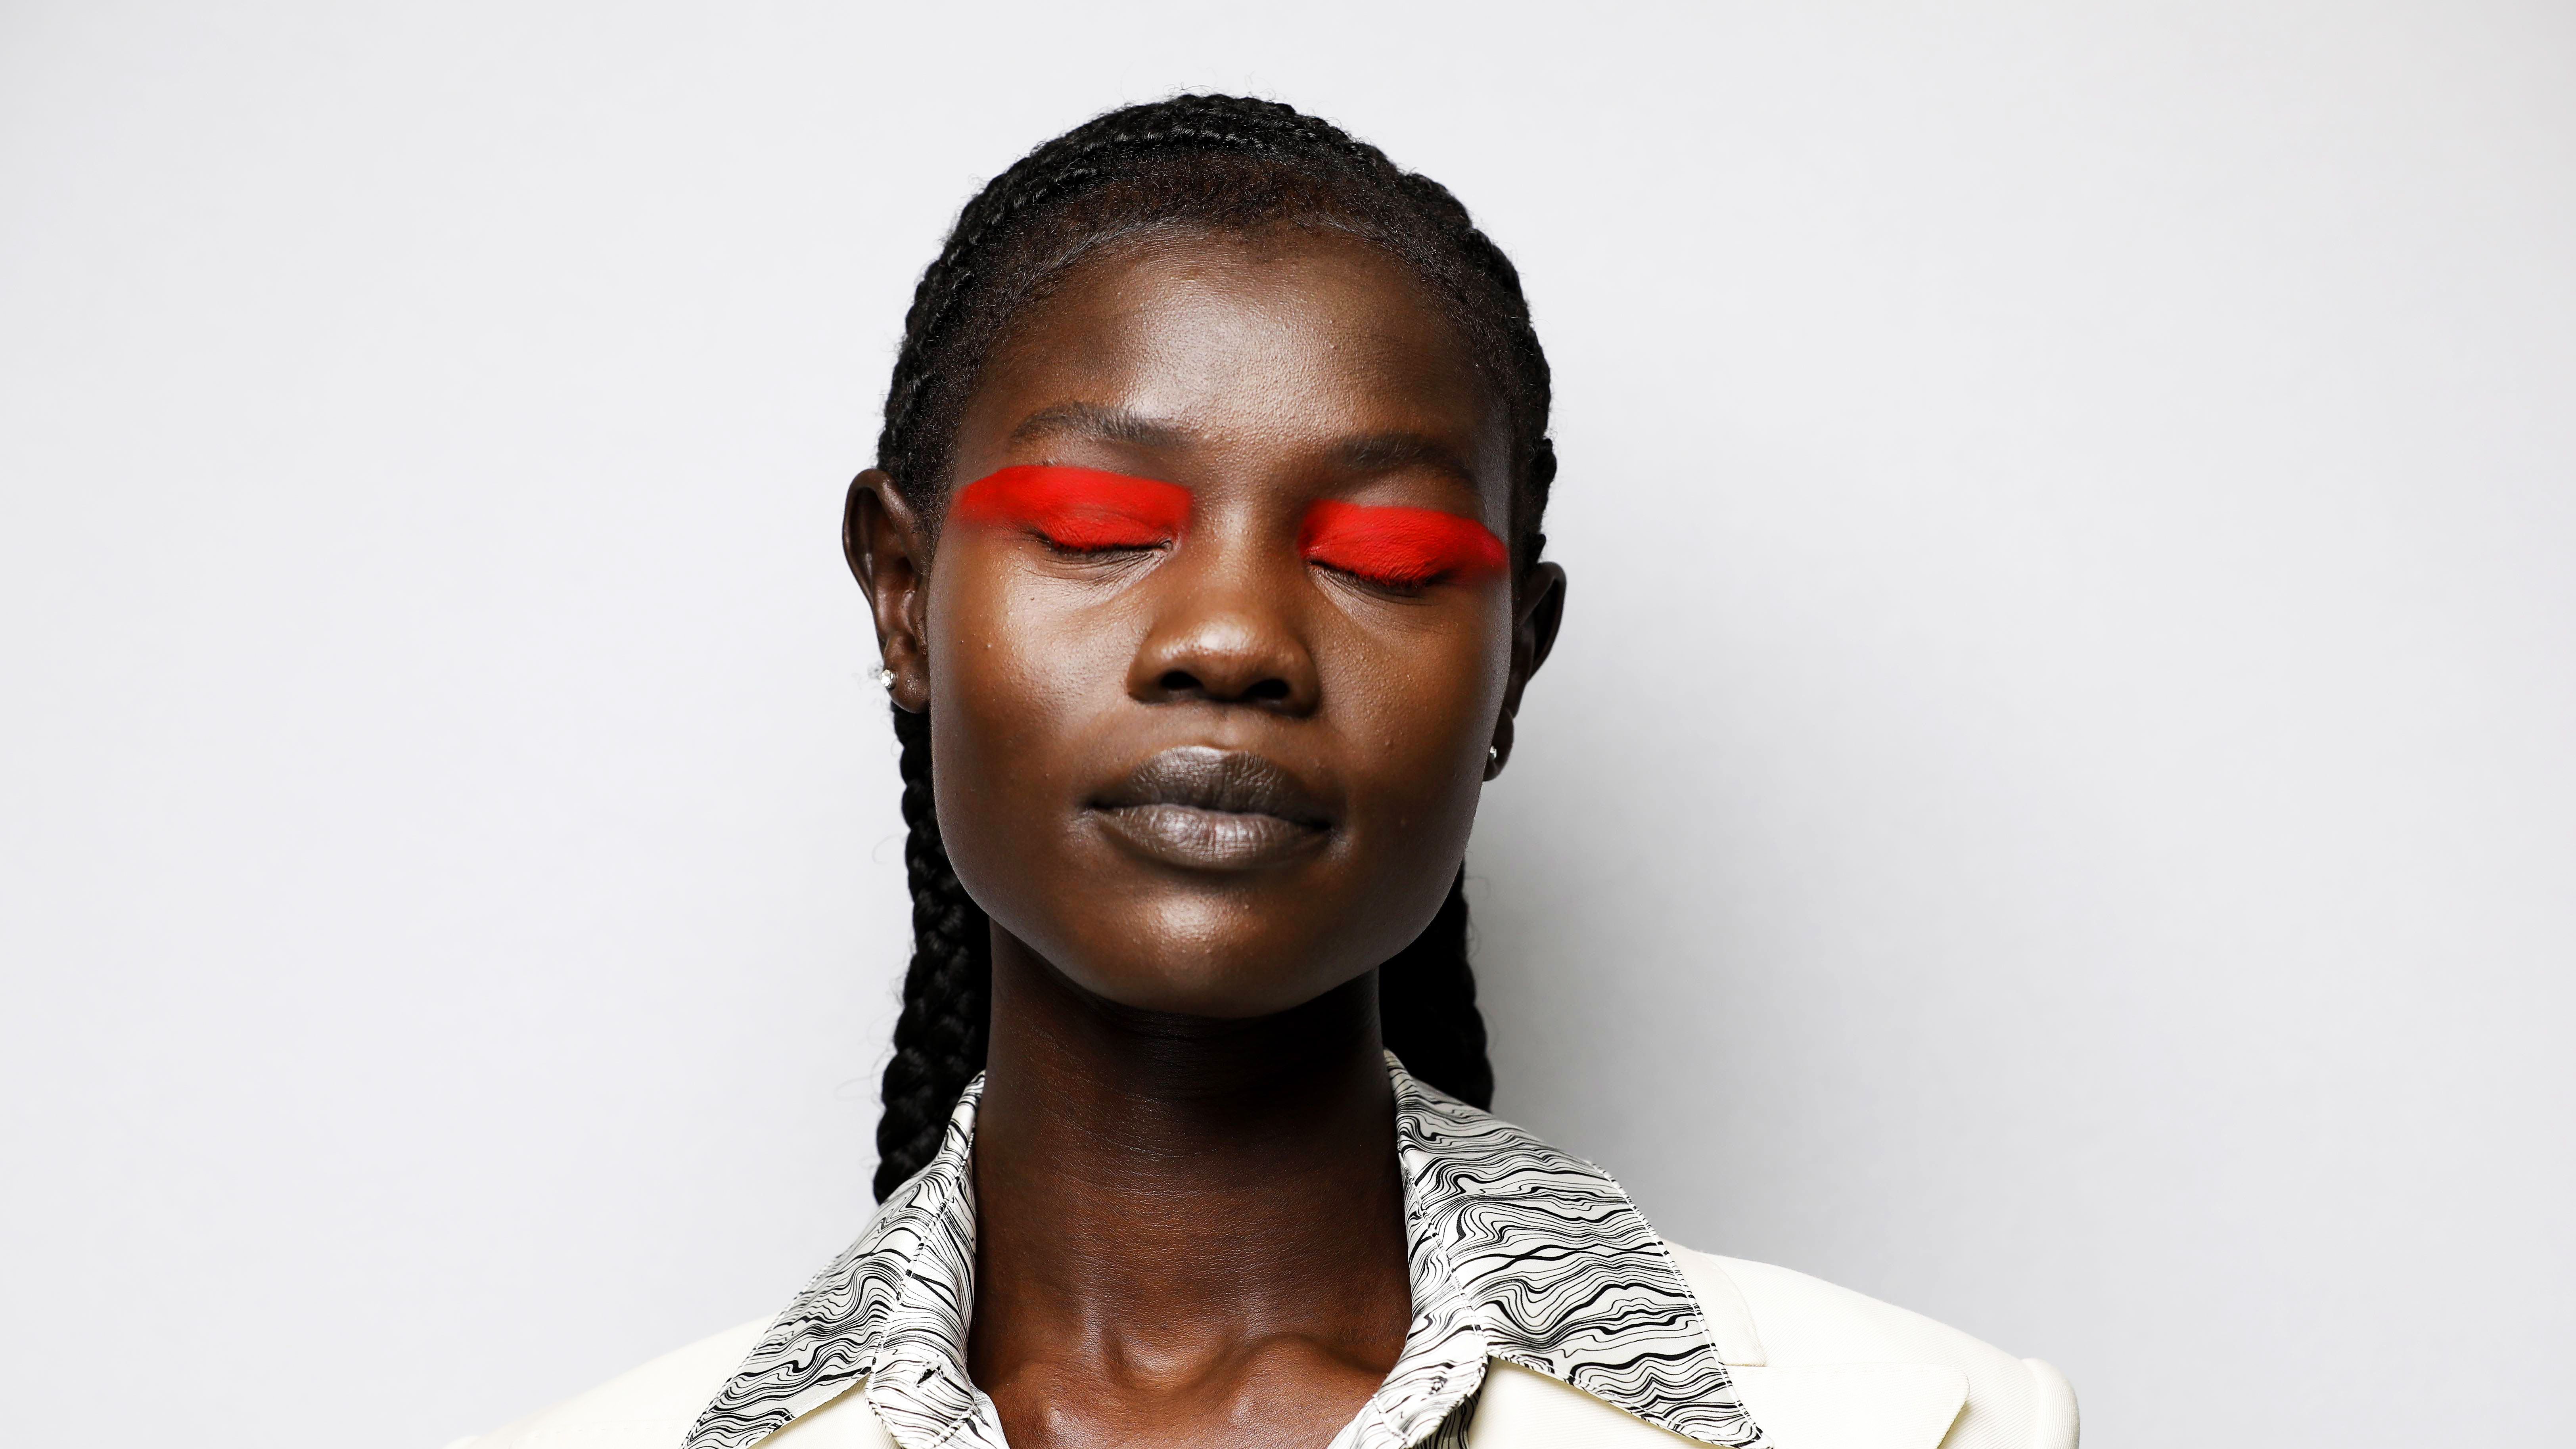 The 11 Summer Makeup Trends for 2021 You'll See Everywhere